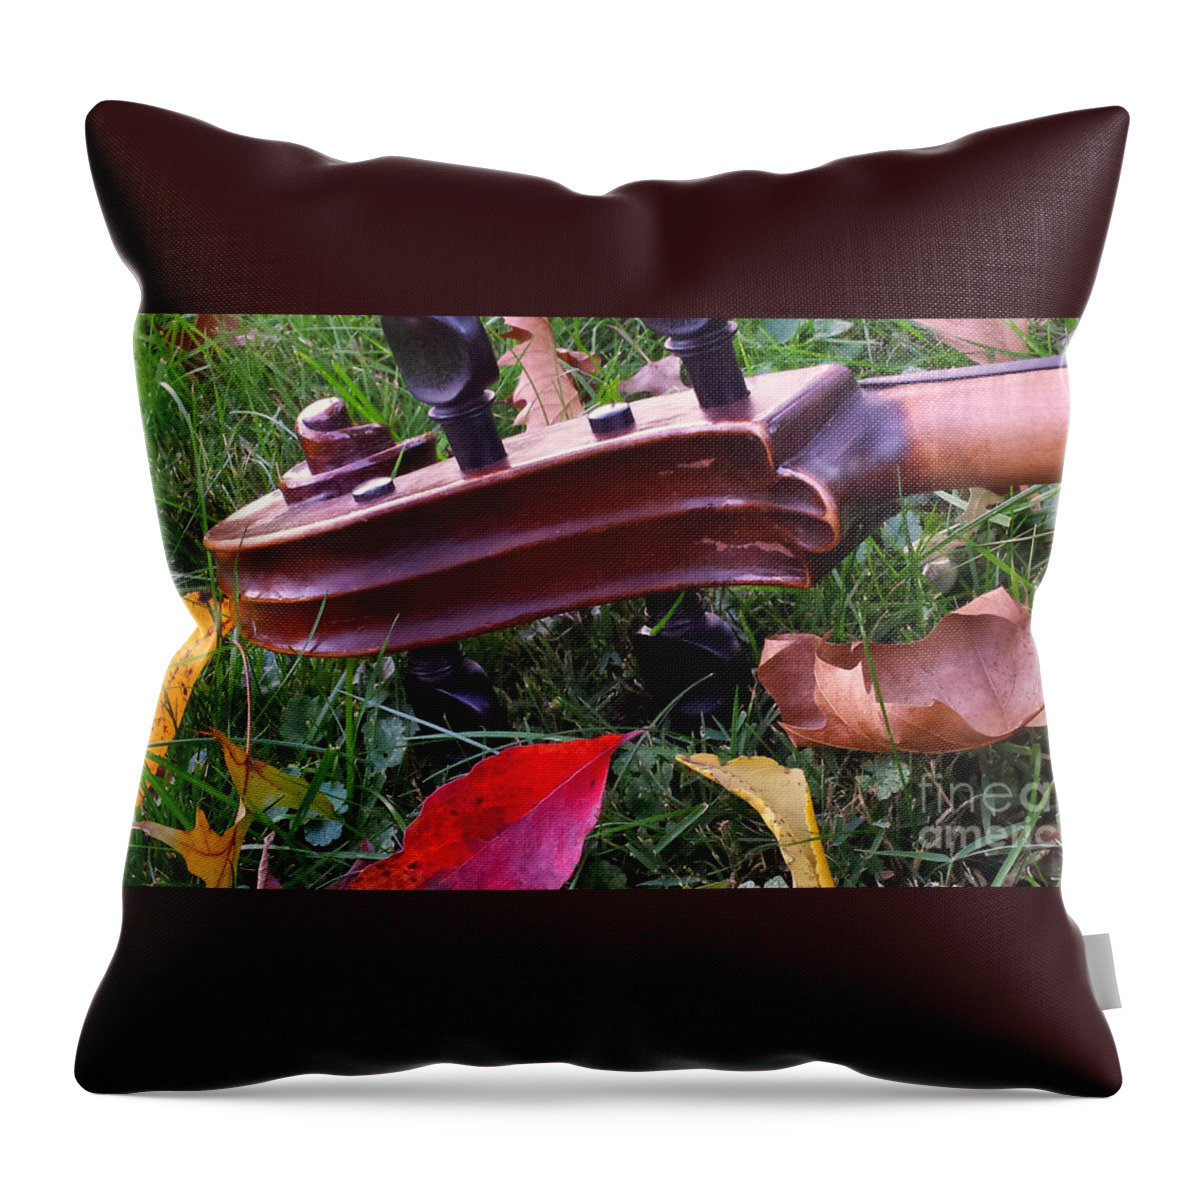 Cello Throw Pillow featuring the photograph Cello Scroll in Autumn by Anna Lisa Yoder